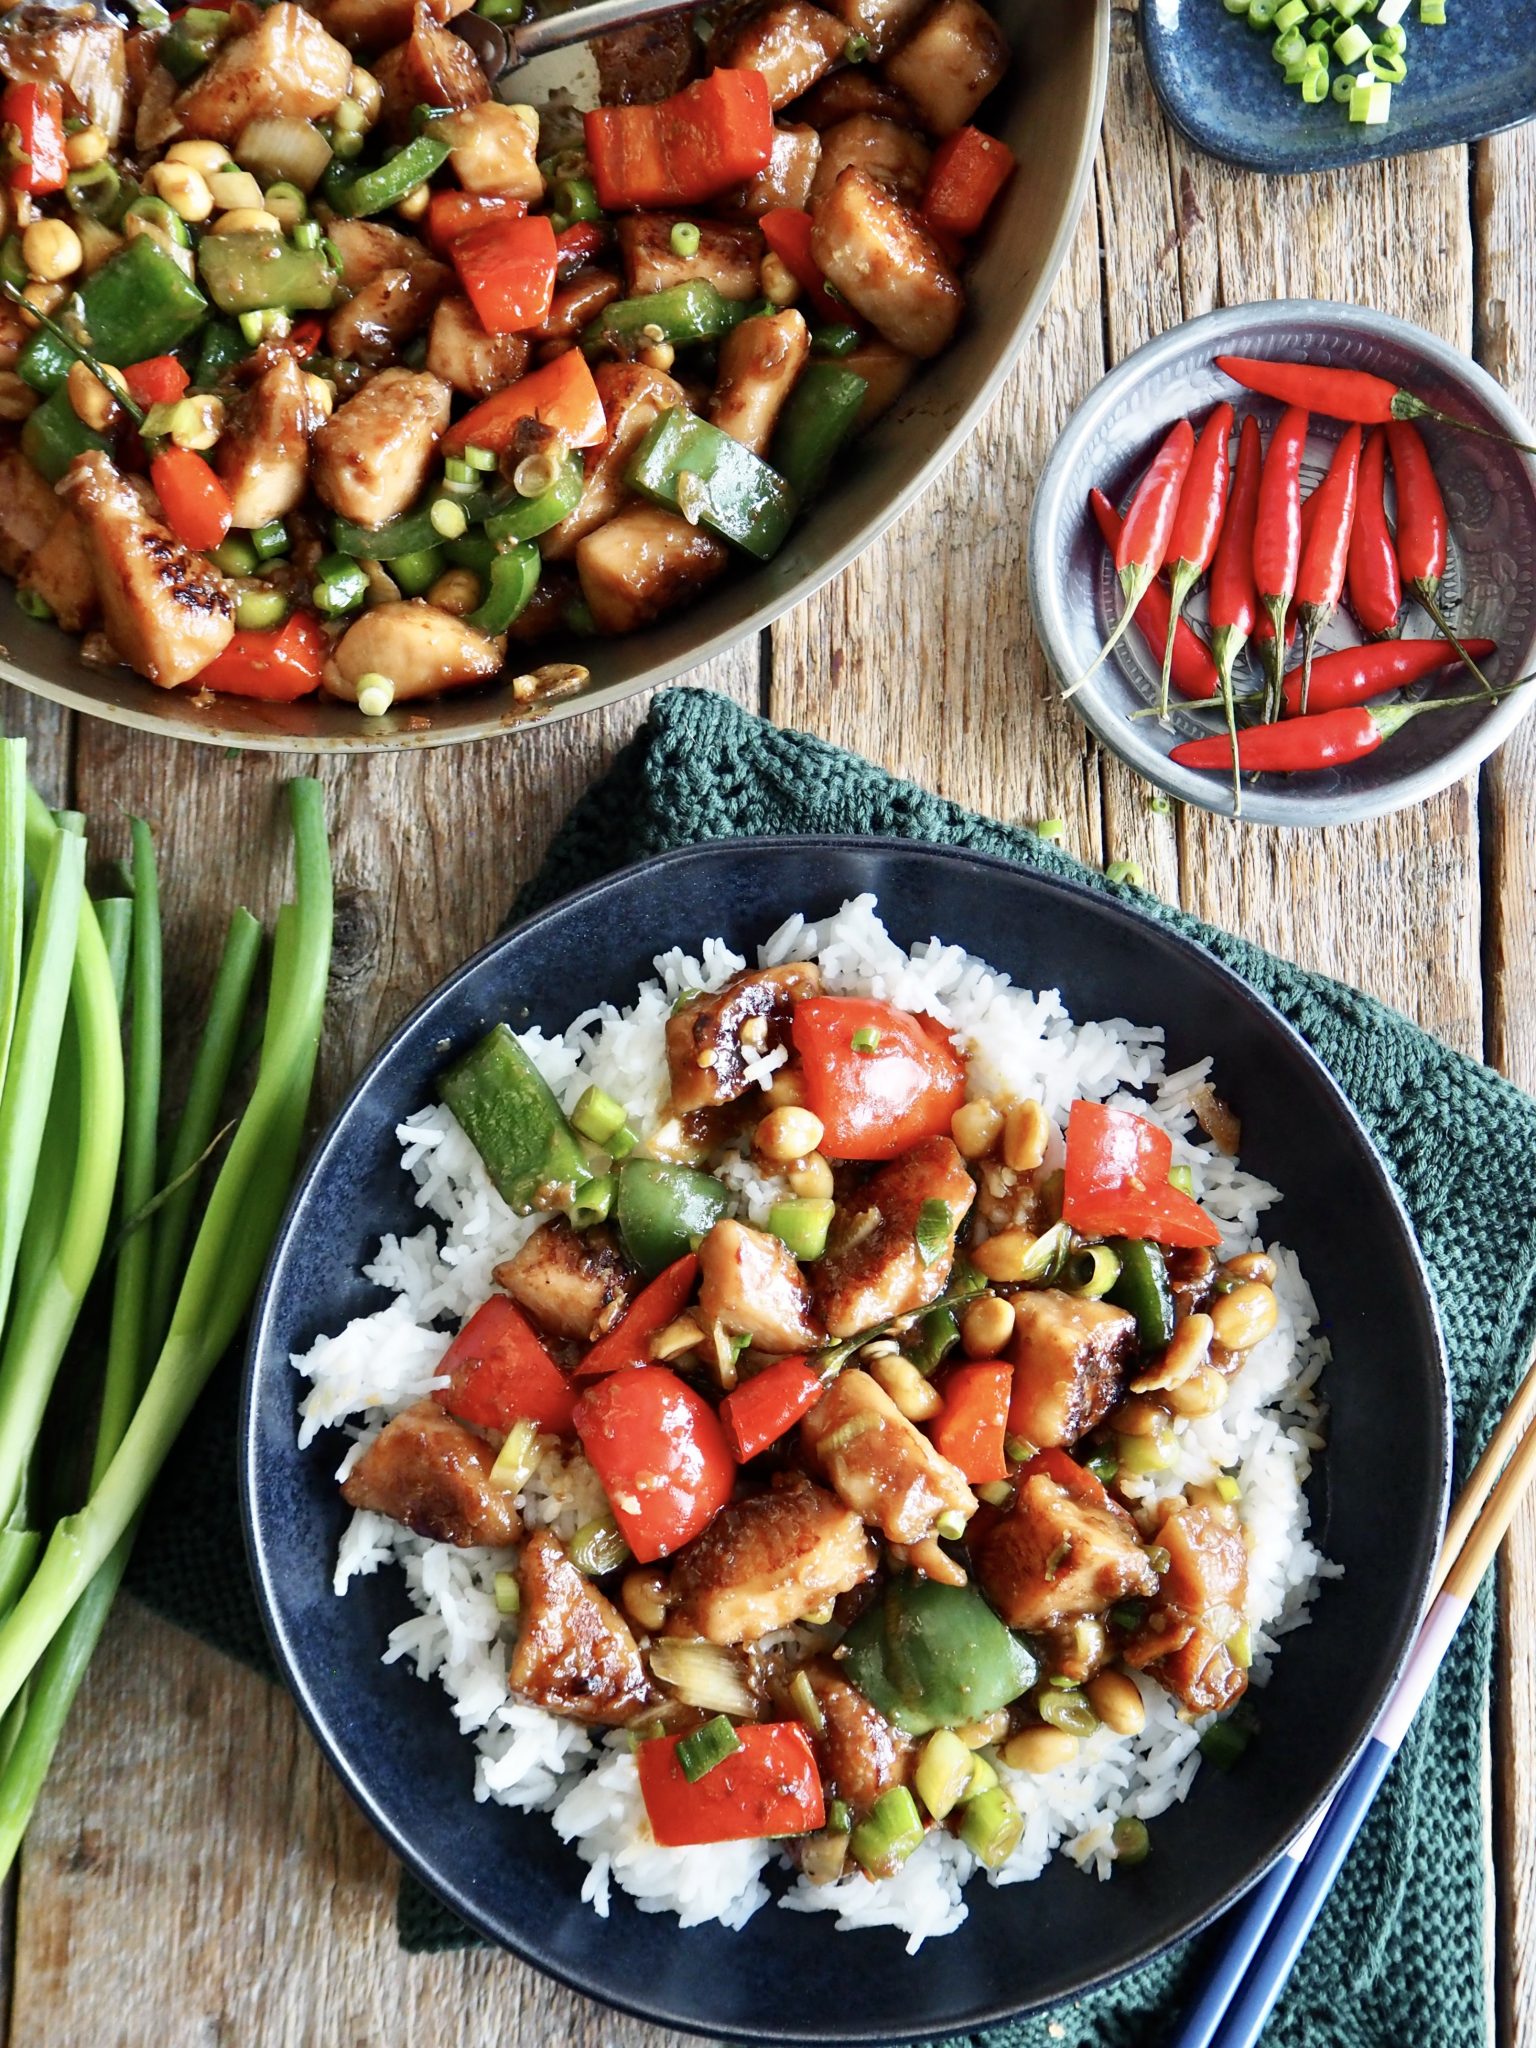 Kung pao kylling - spicy kylling med paprika